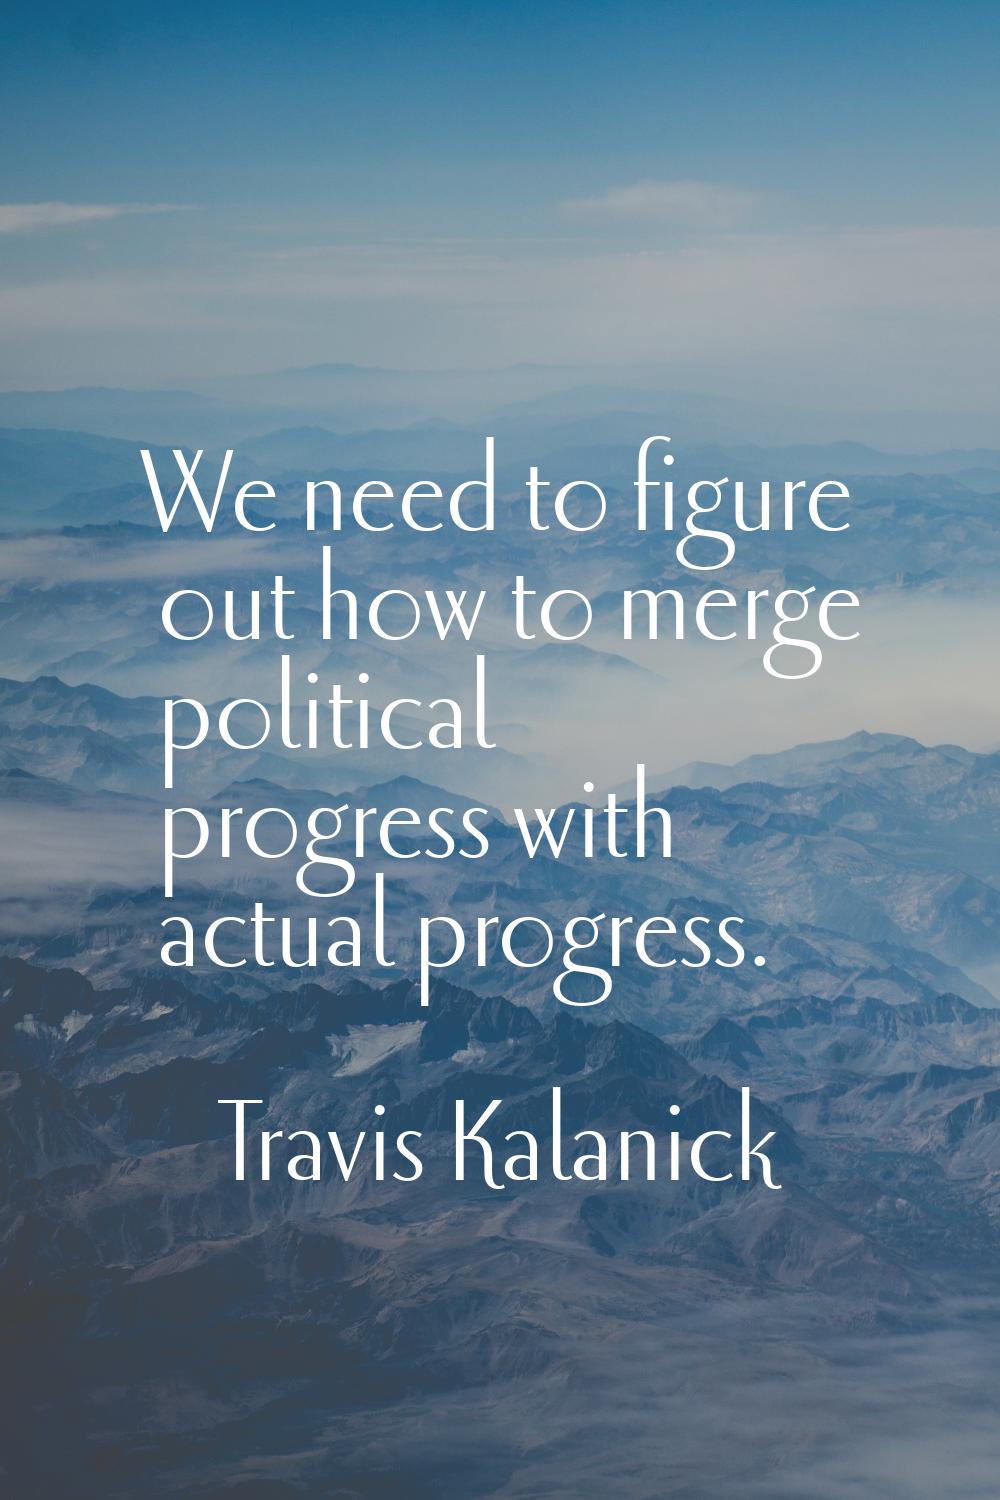 We need to figure out how to merge political progress with actual progress.